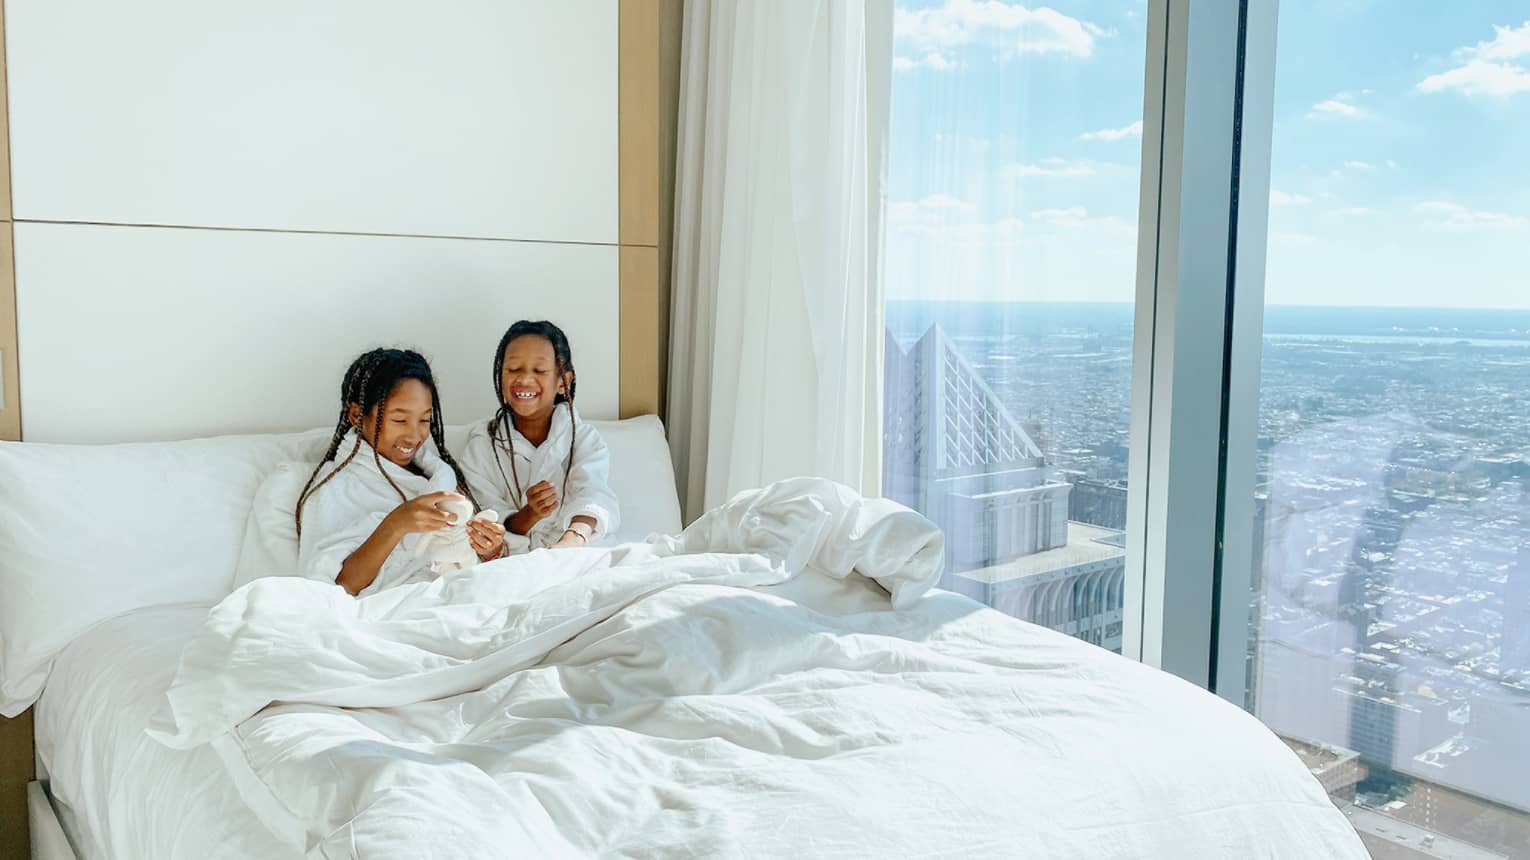 Two young girls relaxing in a bed with robes on.